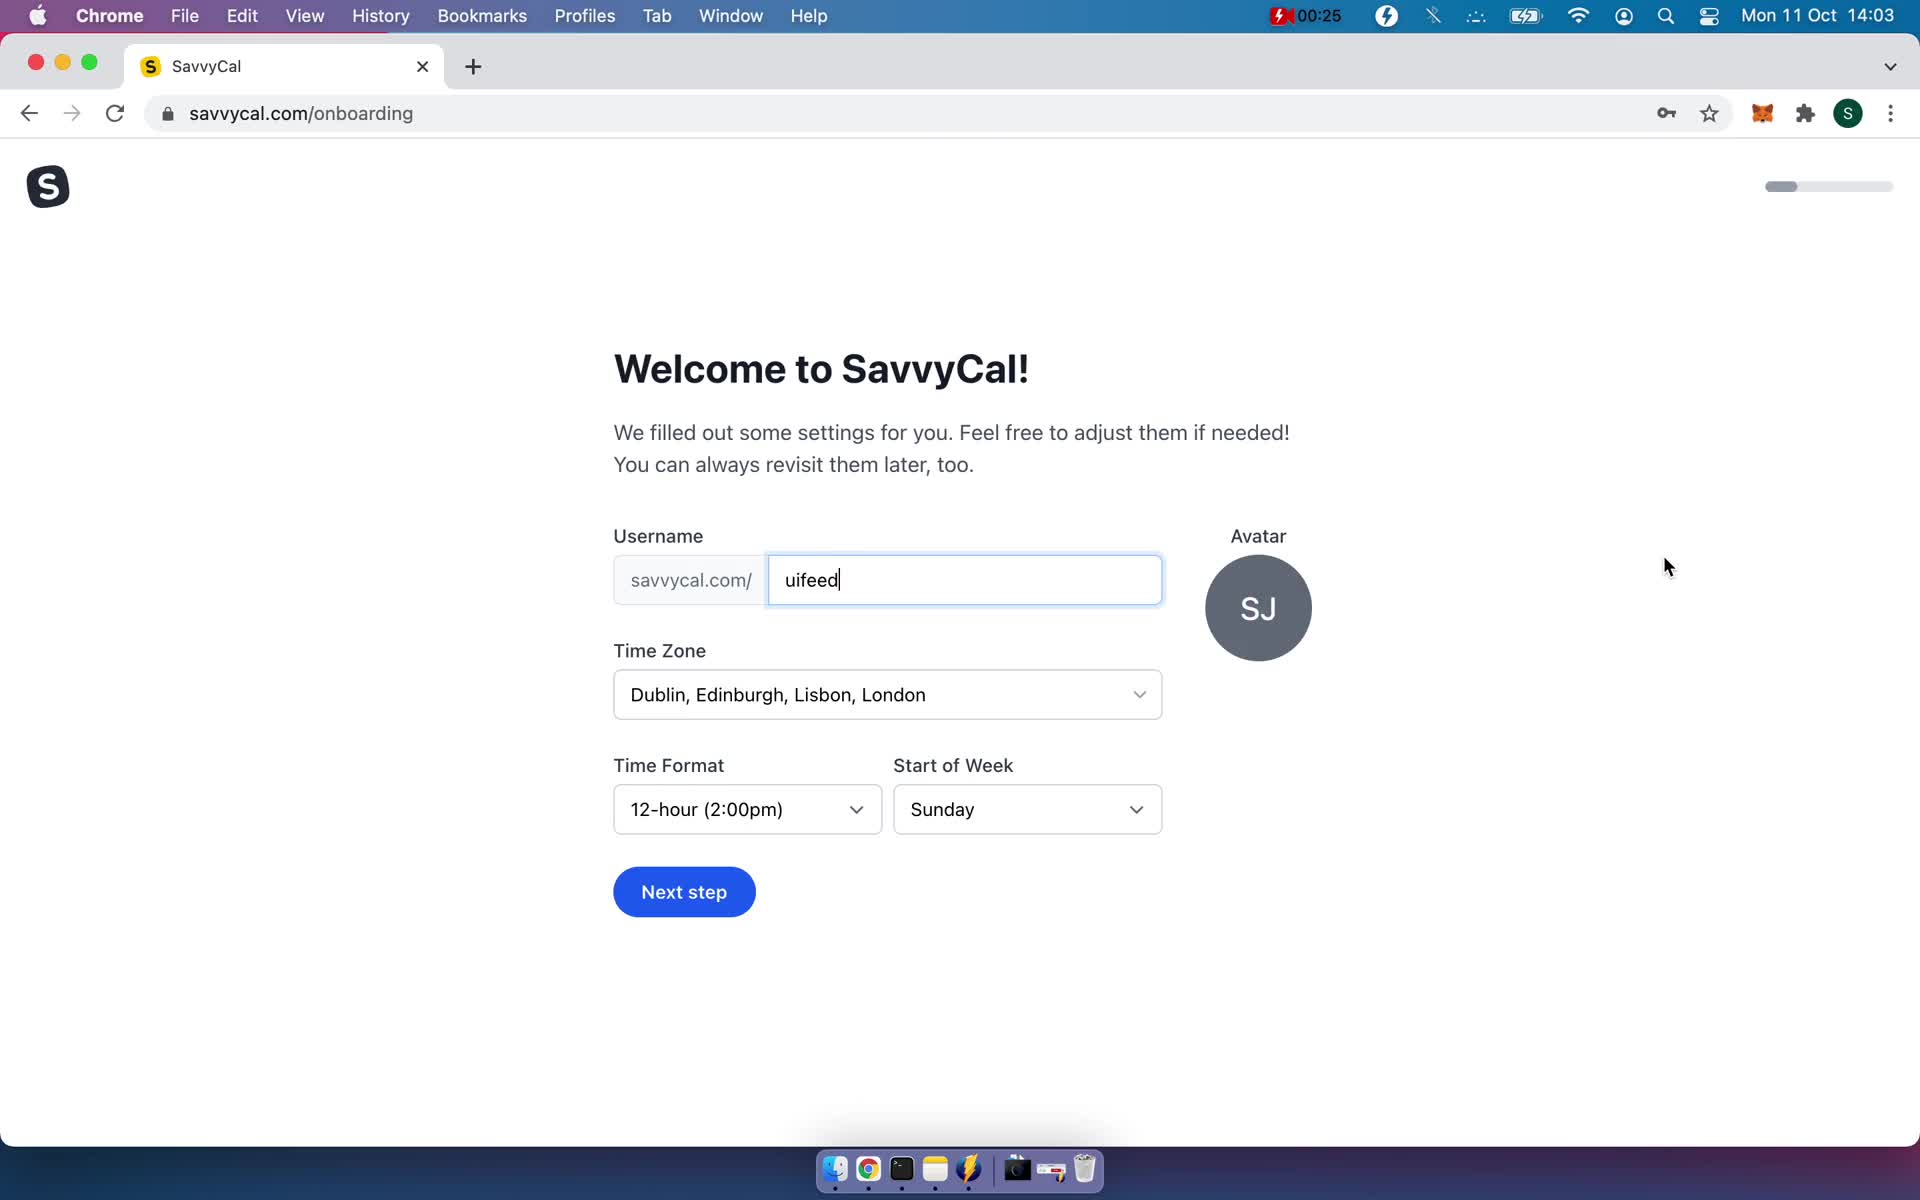 Screenshot of Continue setup during Onboarding on SavvyCal user flow